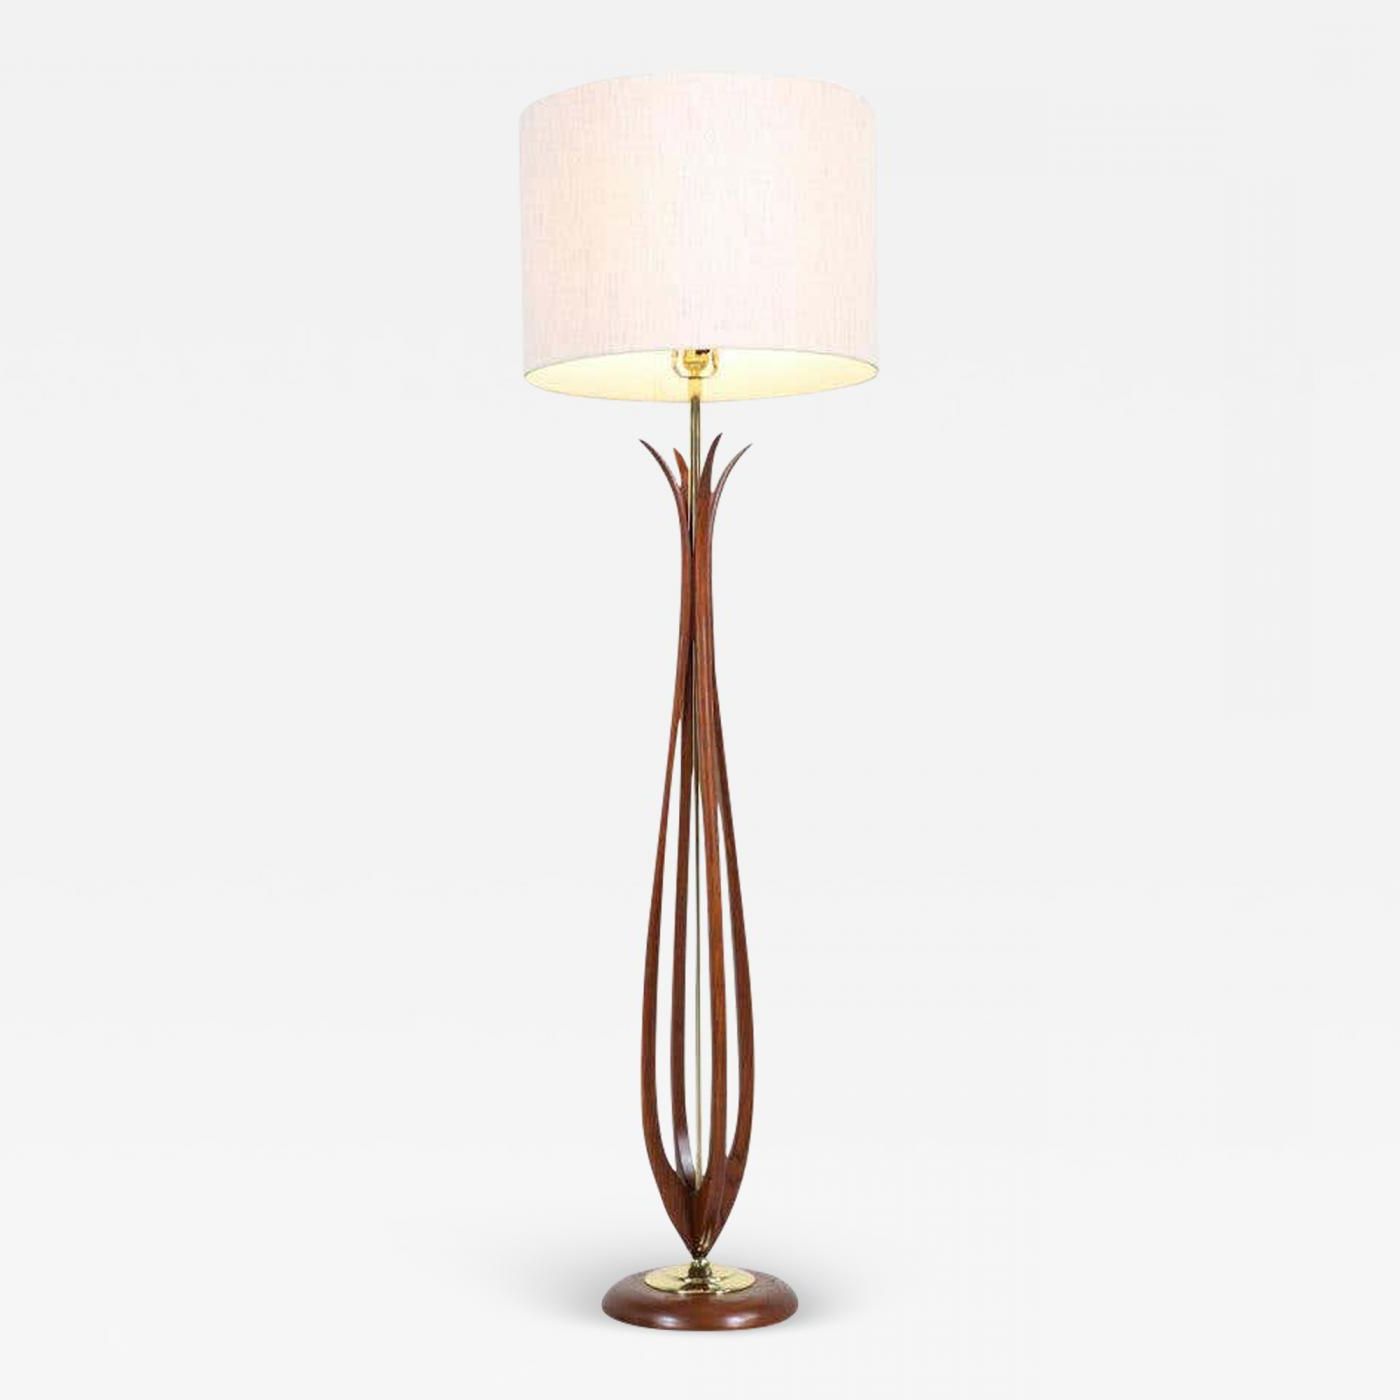 Walnut Standing Lamps Within Famous Mid Century Modern Sculpted Walnut Floor Lamp With Brass Accents (View 11 of 15)